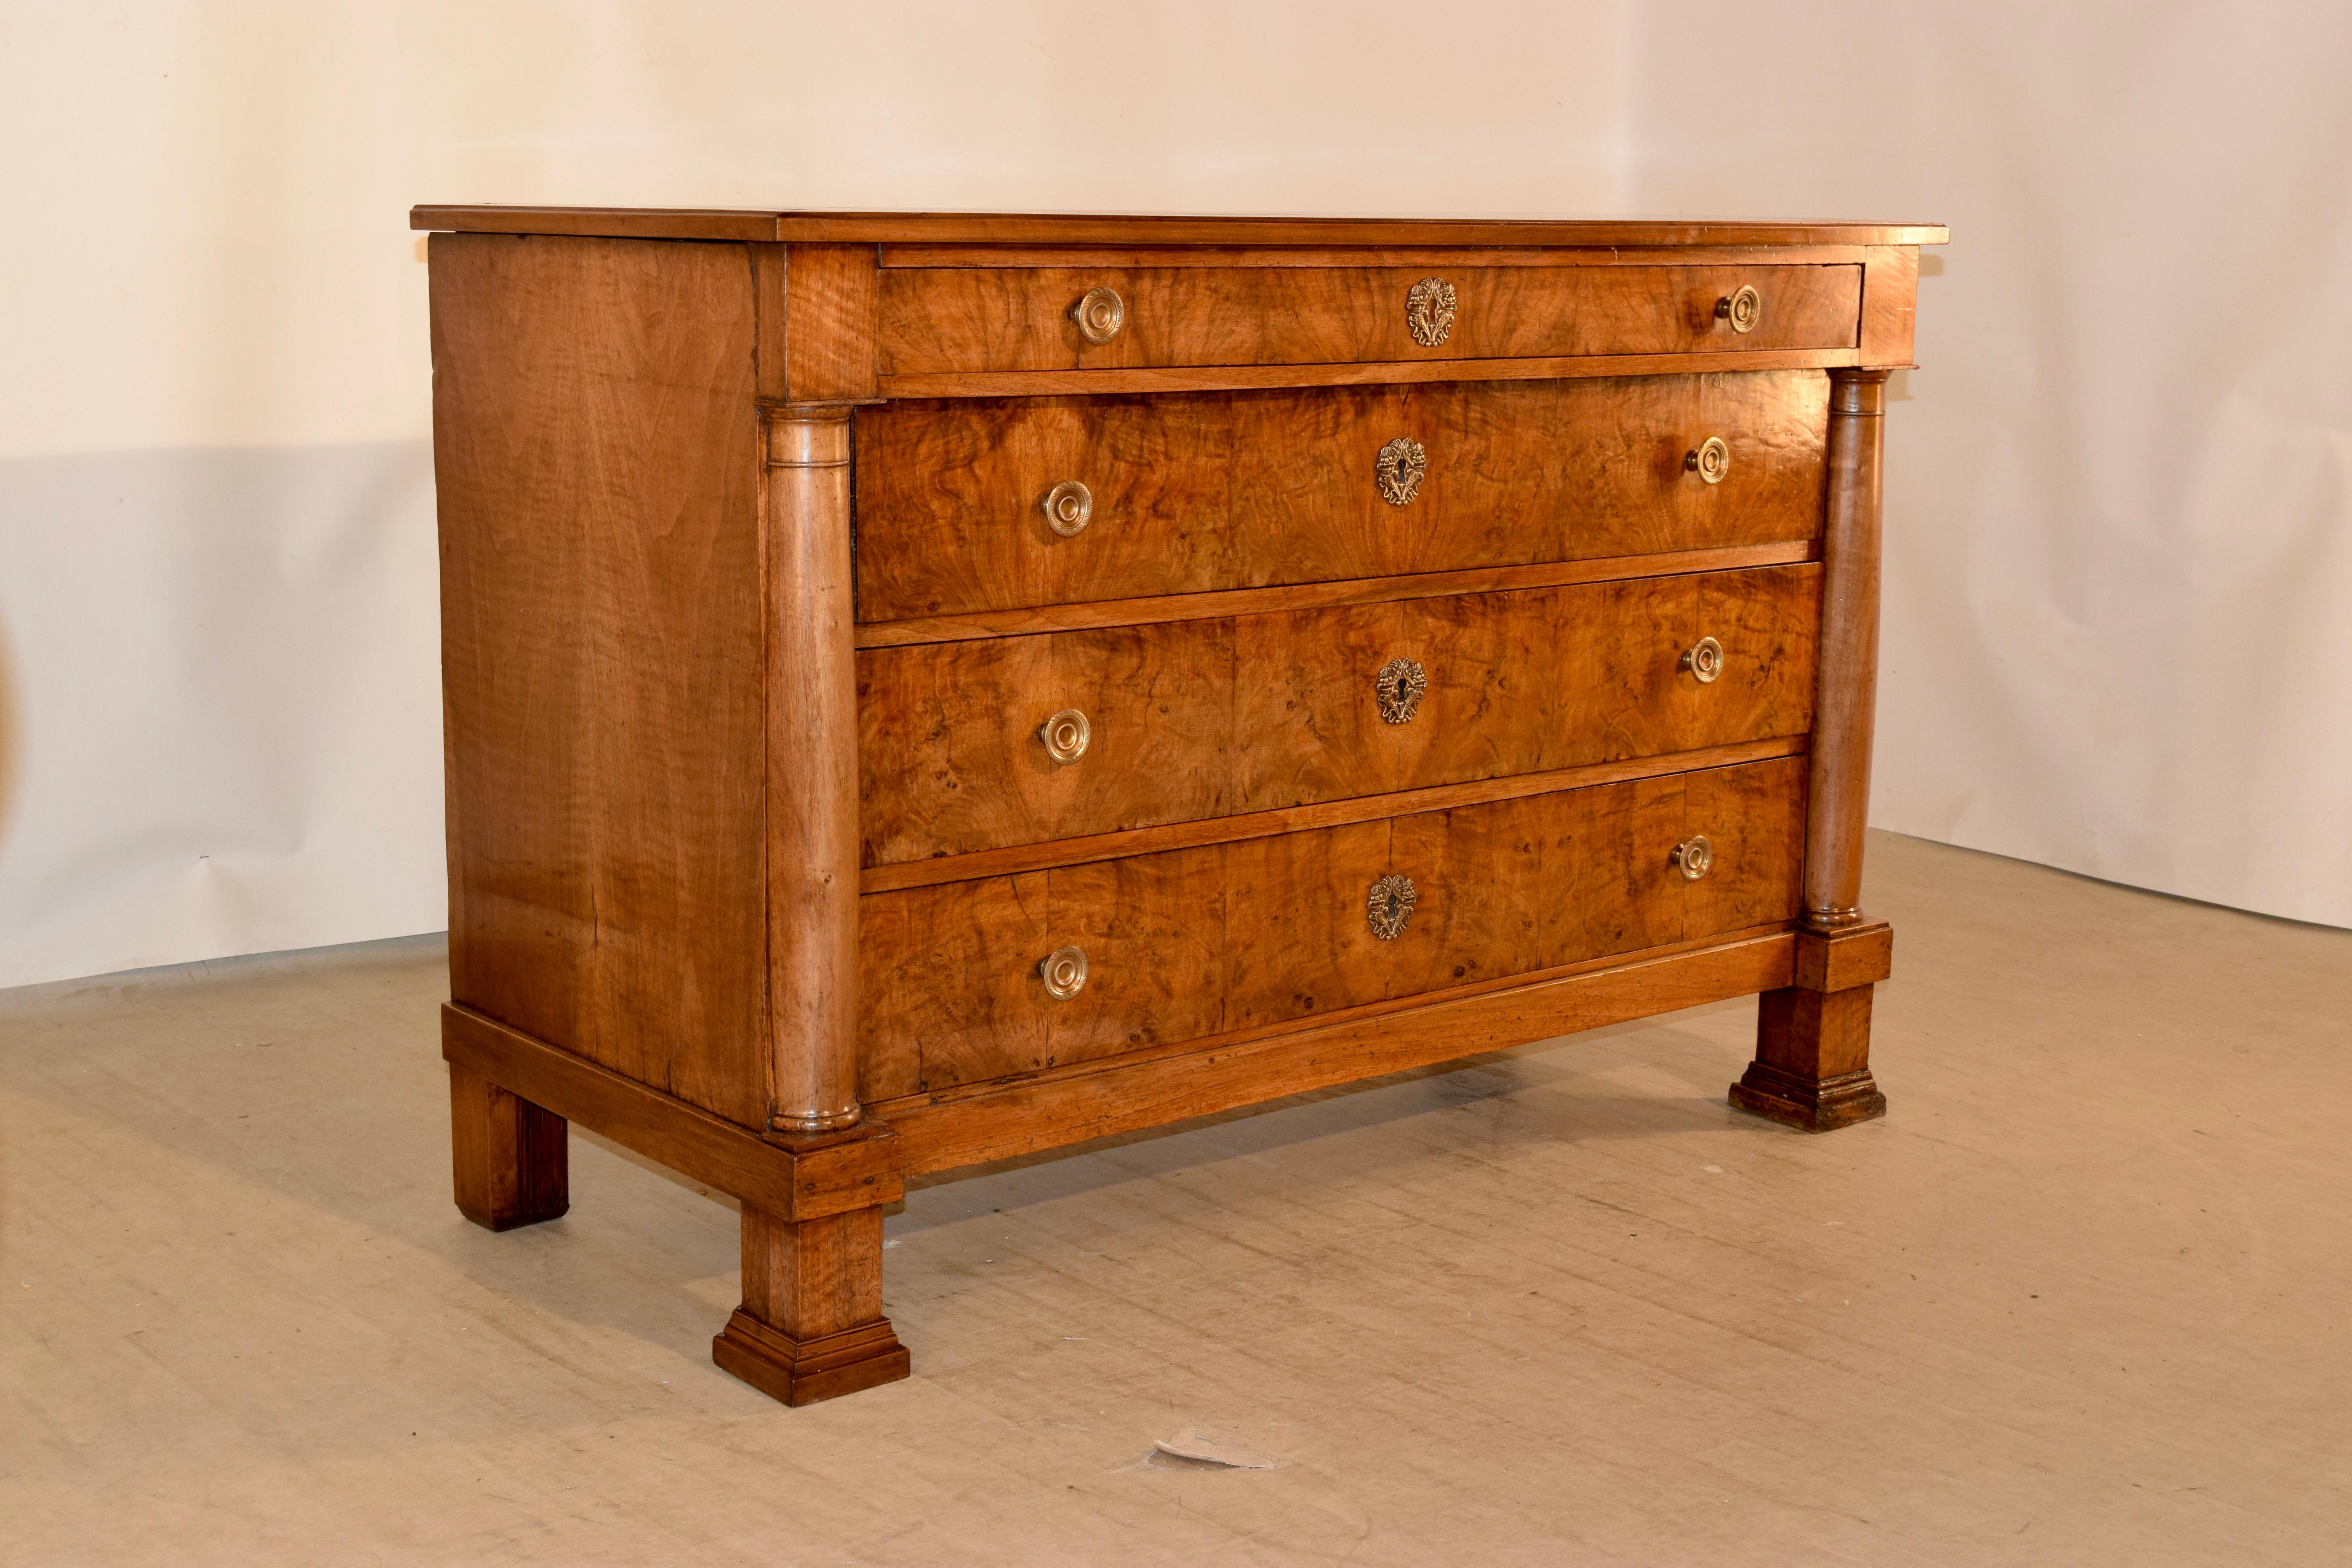 19th century French Empire commode from France made from walnut. The top is banded and has a beveled edge. This follows down to an apron containing a drawer over three drawers, all with burl drawer fronts. These are flanked by hand turned columns,